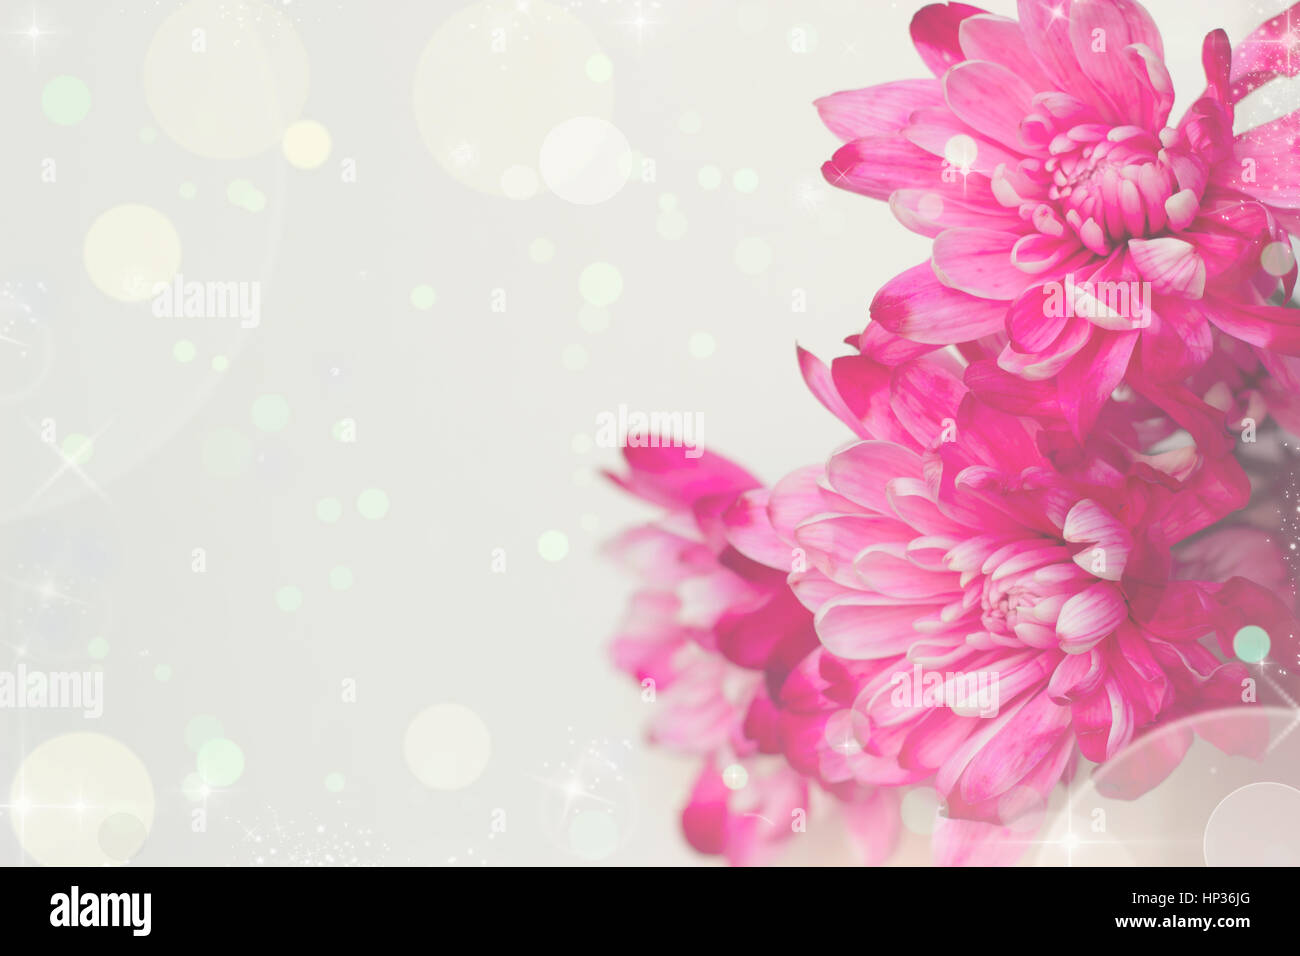 Pink flowers in pastel colors wallpaper Stock Photo - Alamy